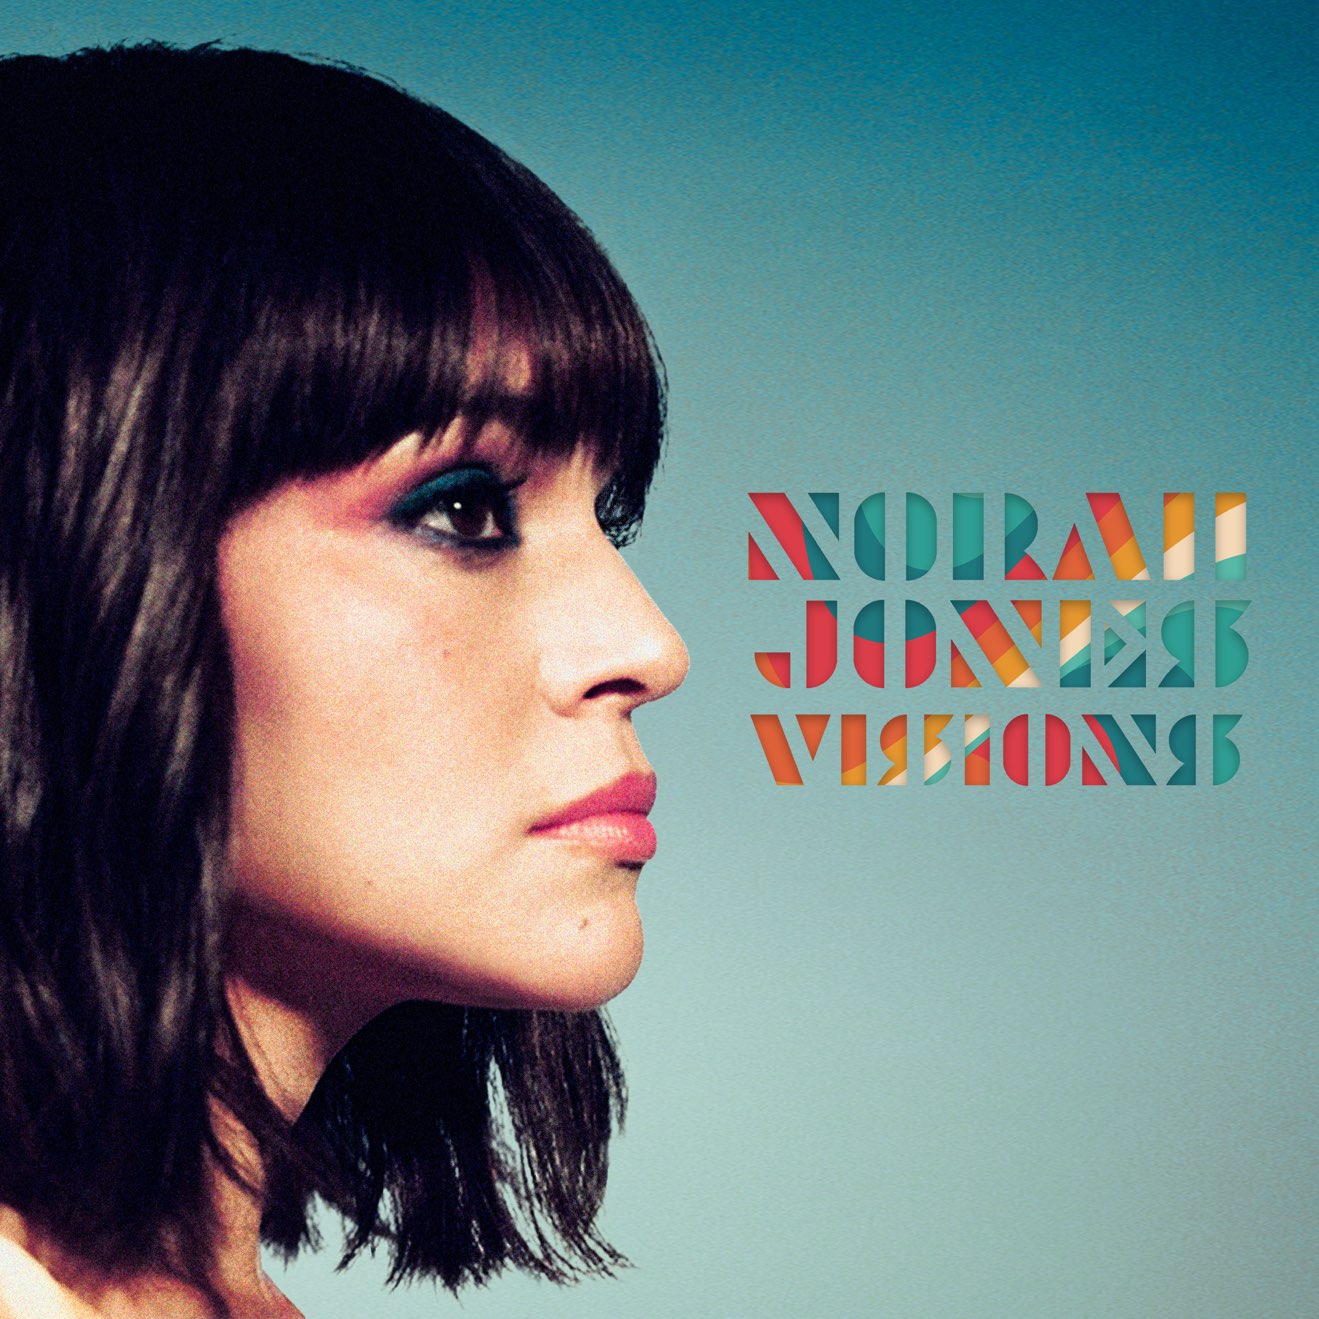 Norah Jones – Staring at the Wall – Pre-Single (2024) [iTunes Match M4A]